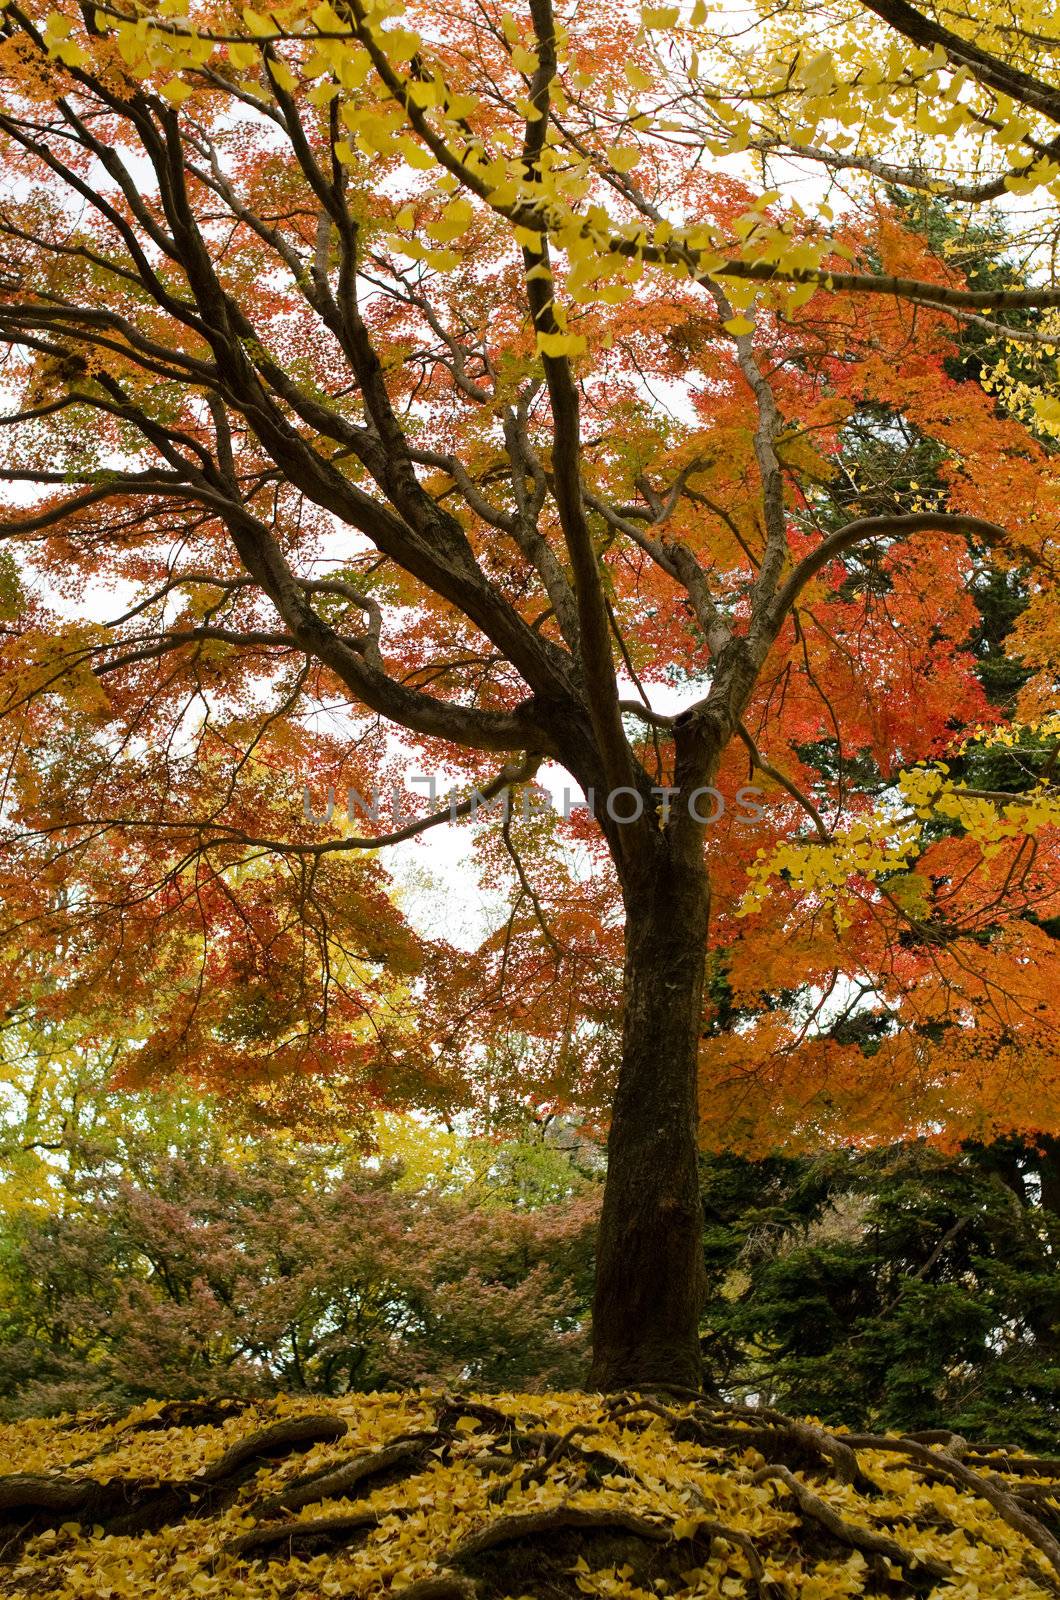 Japanese maple tree in autumn with yellow ginkgo leaves on forest floor